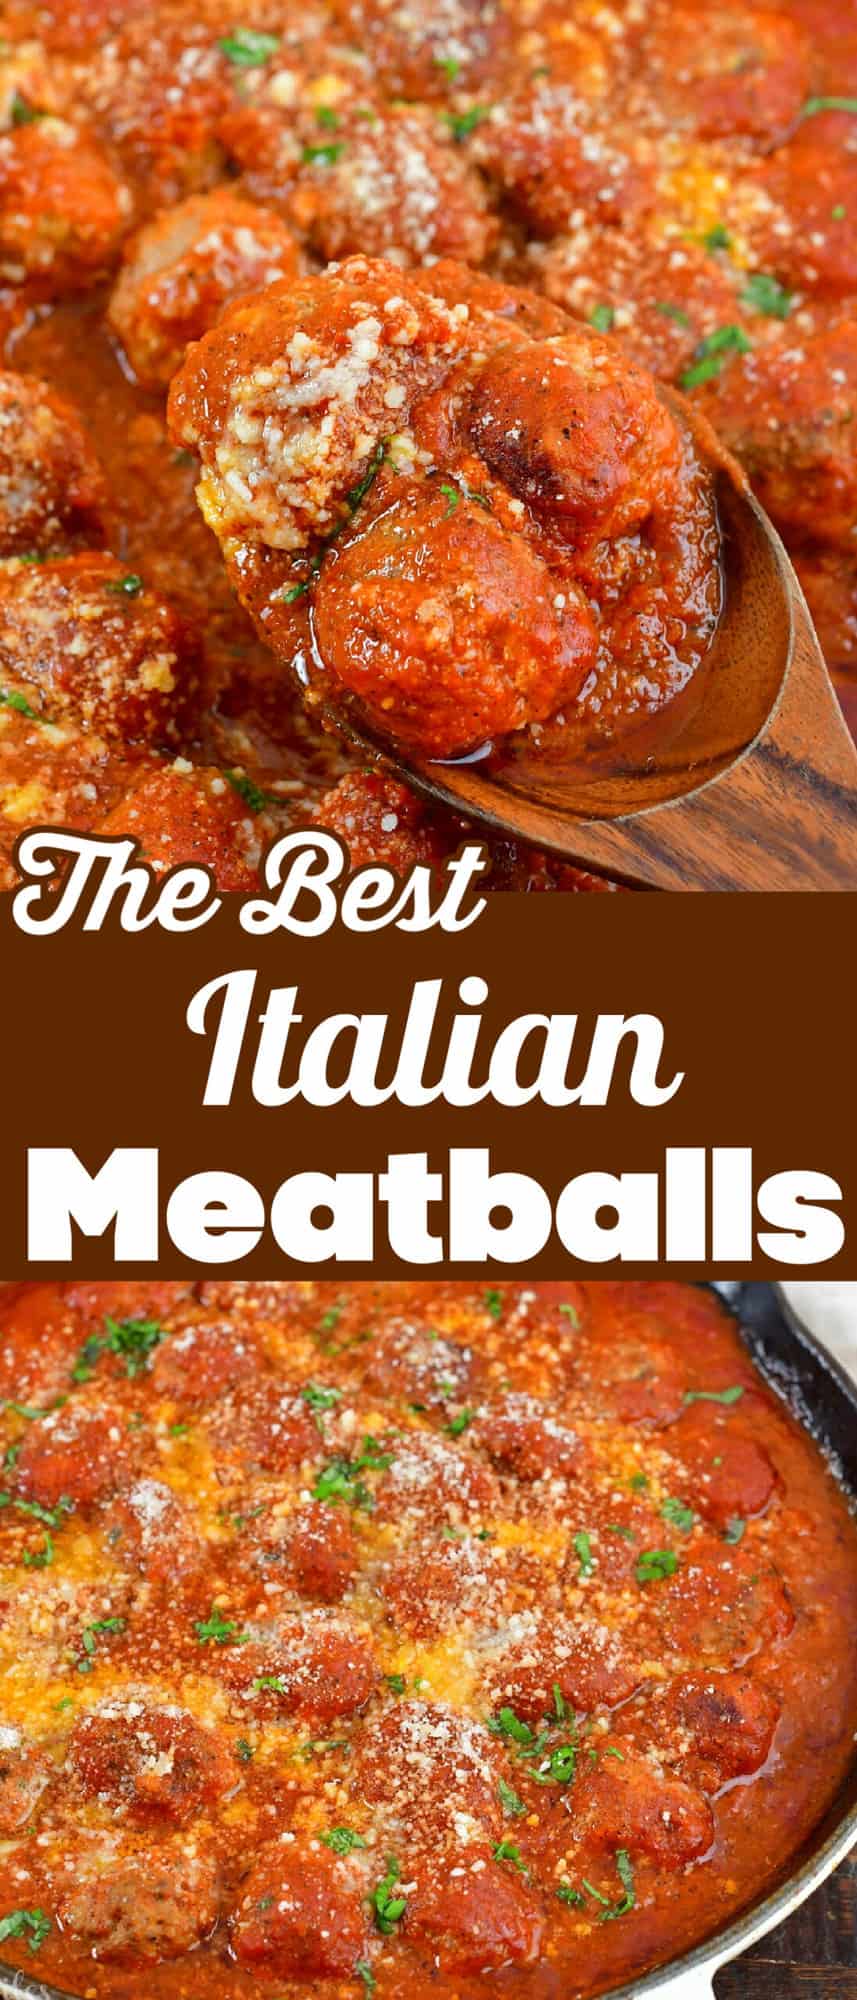 collage image of scooping out some meatballs and meatballs in a pan